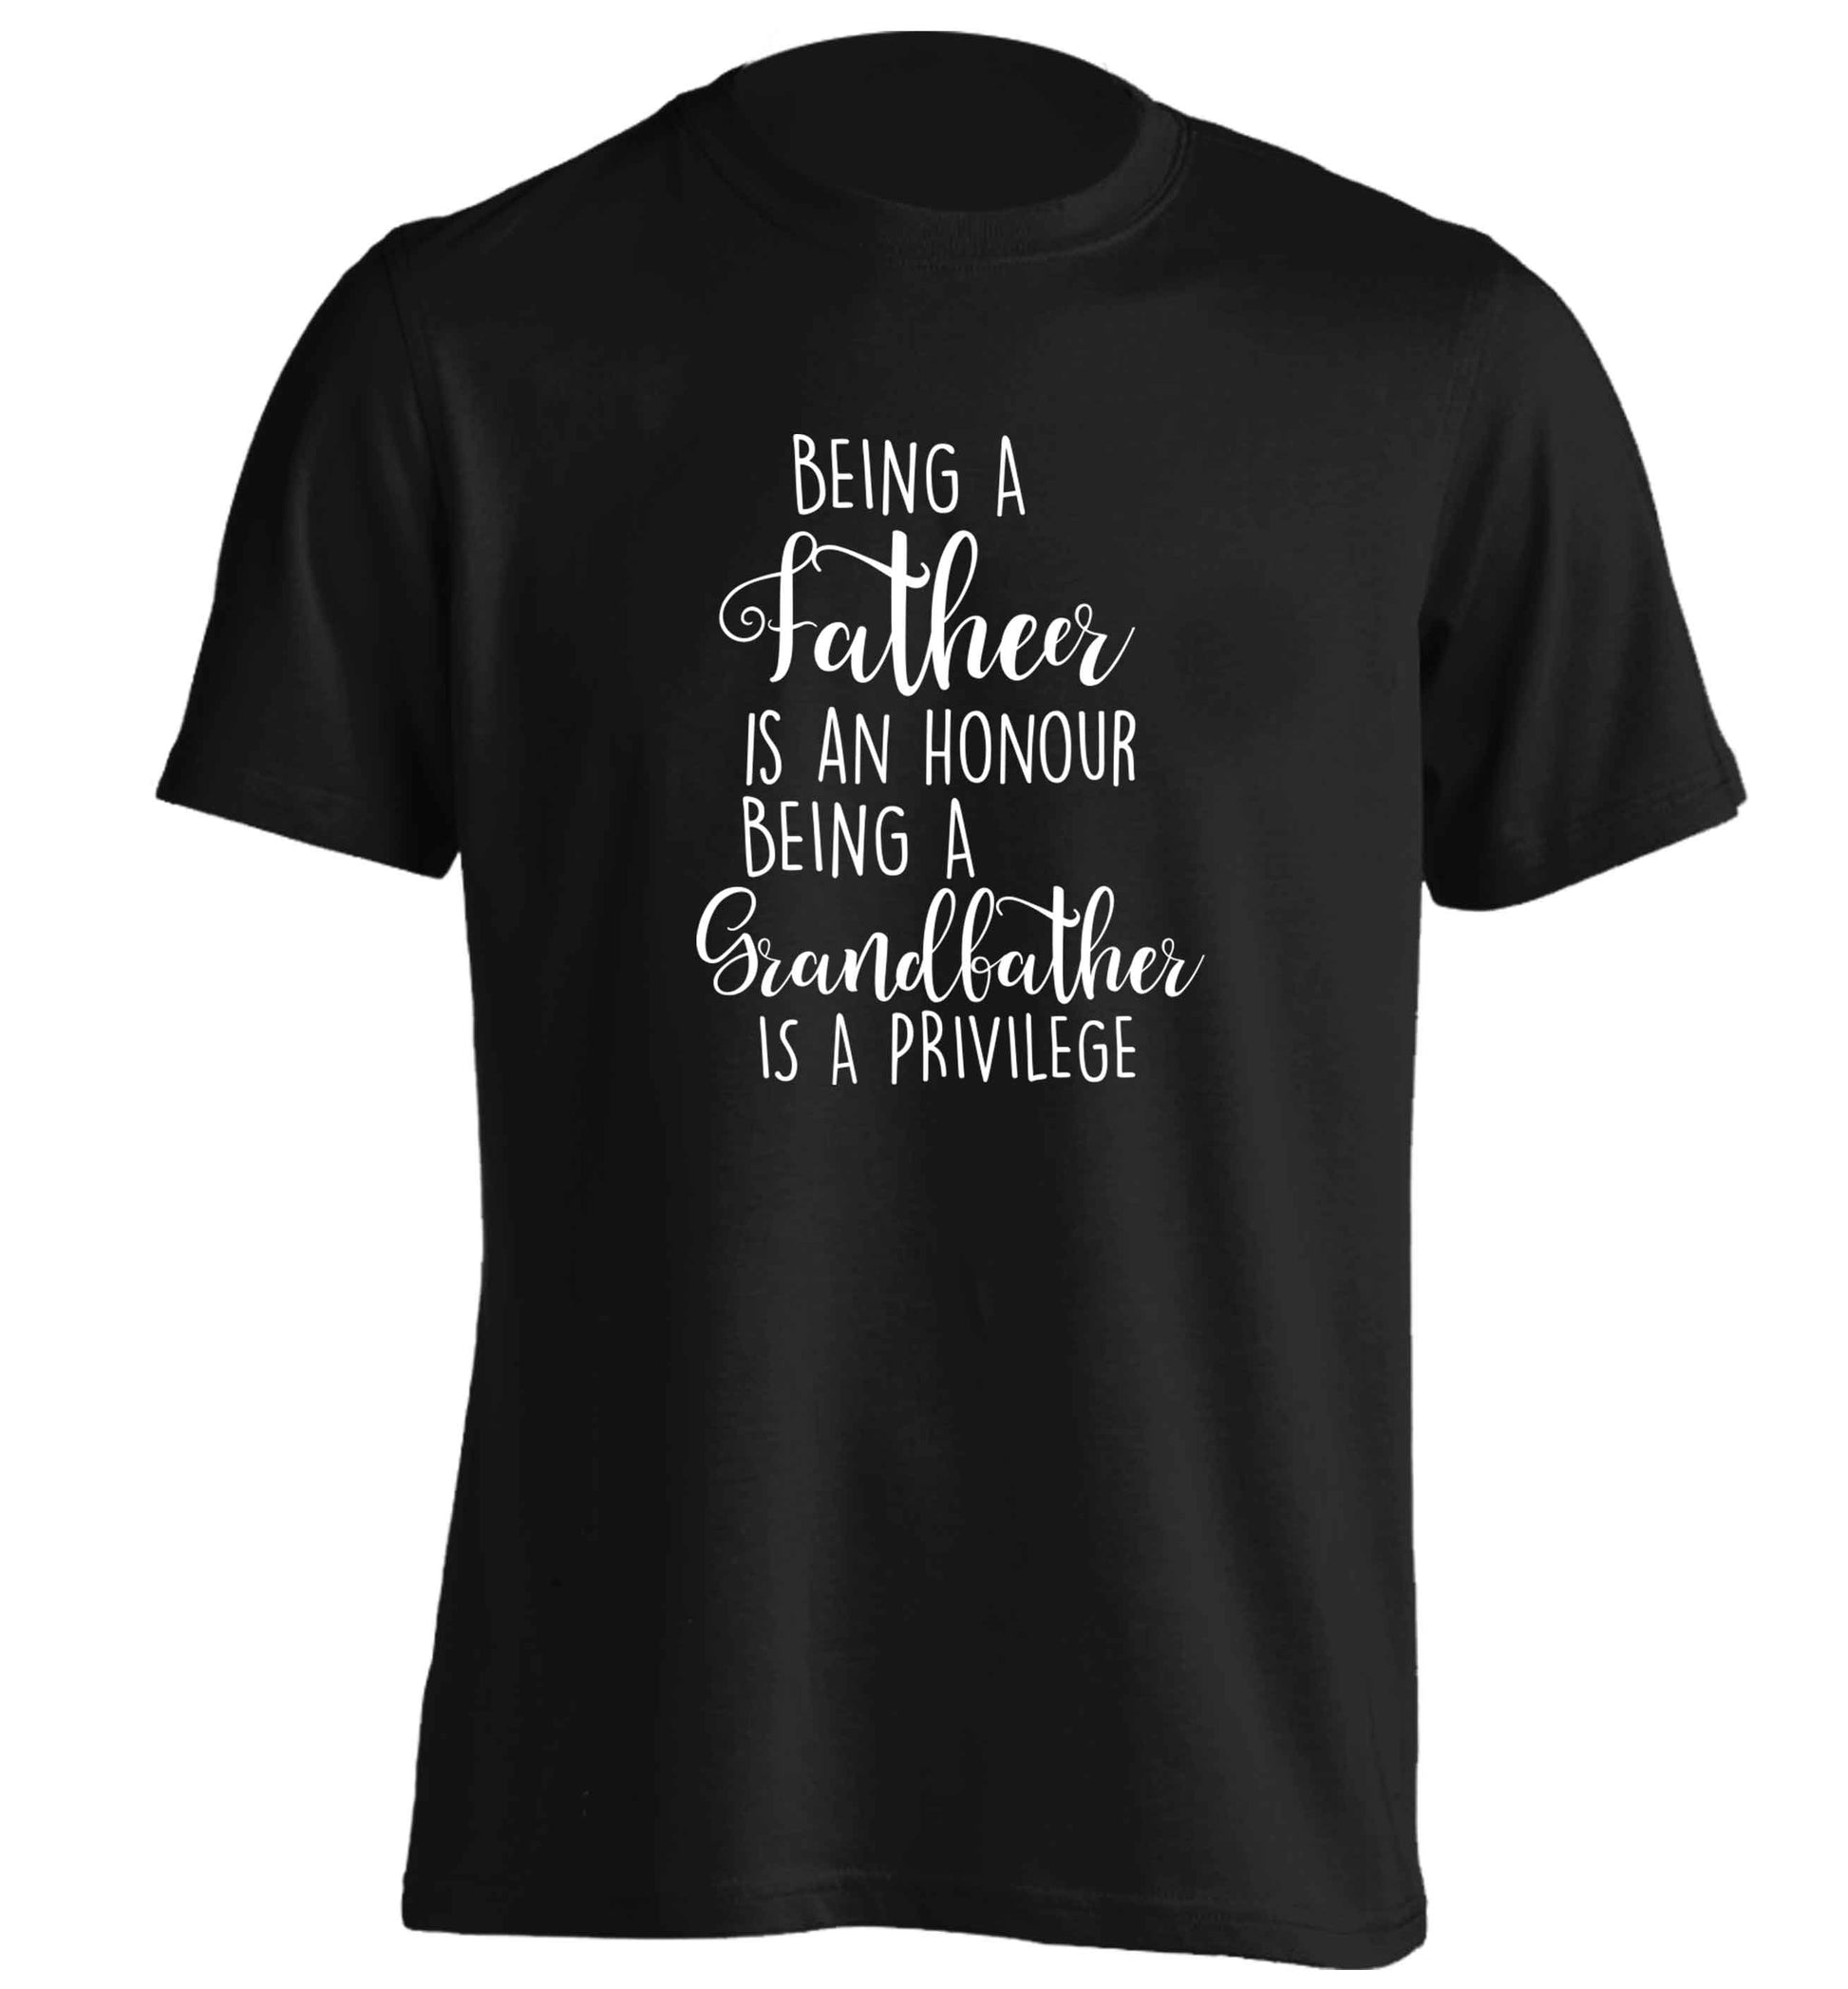 Being a father is an honour being a grandfather is a privilege adults unisex black Tshirt 2XL